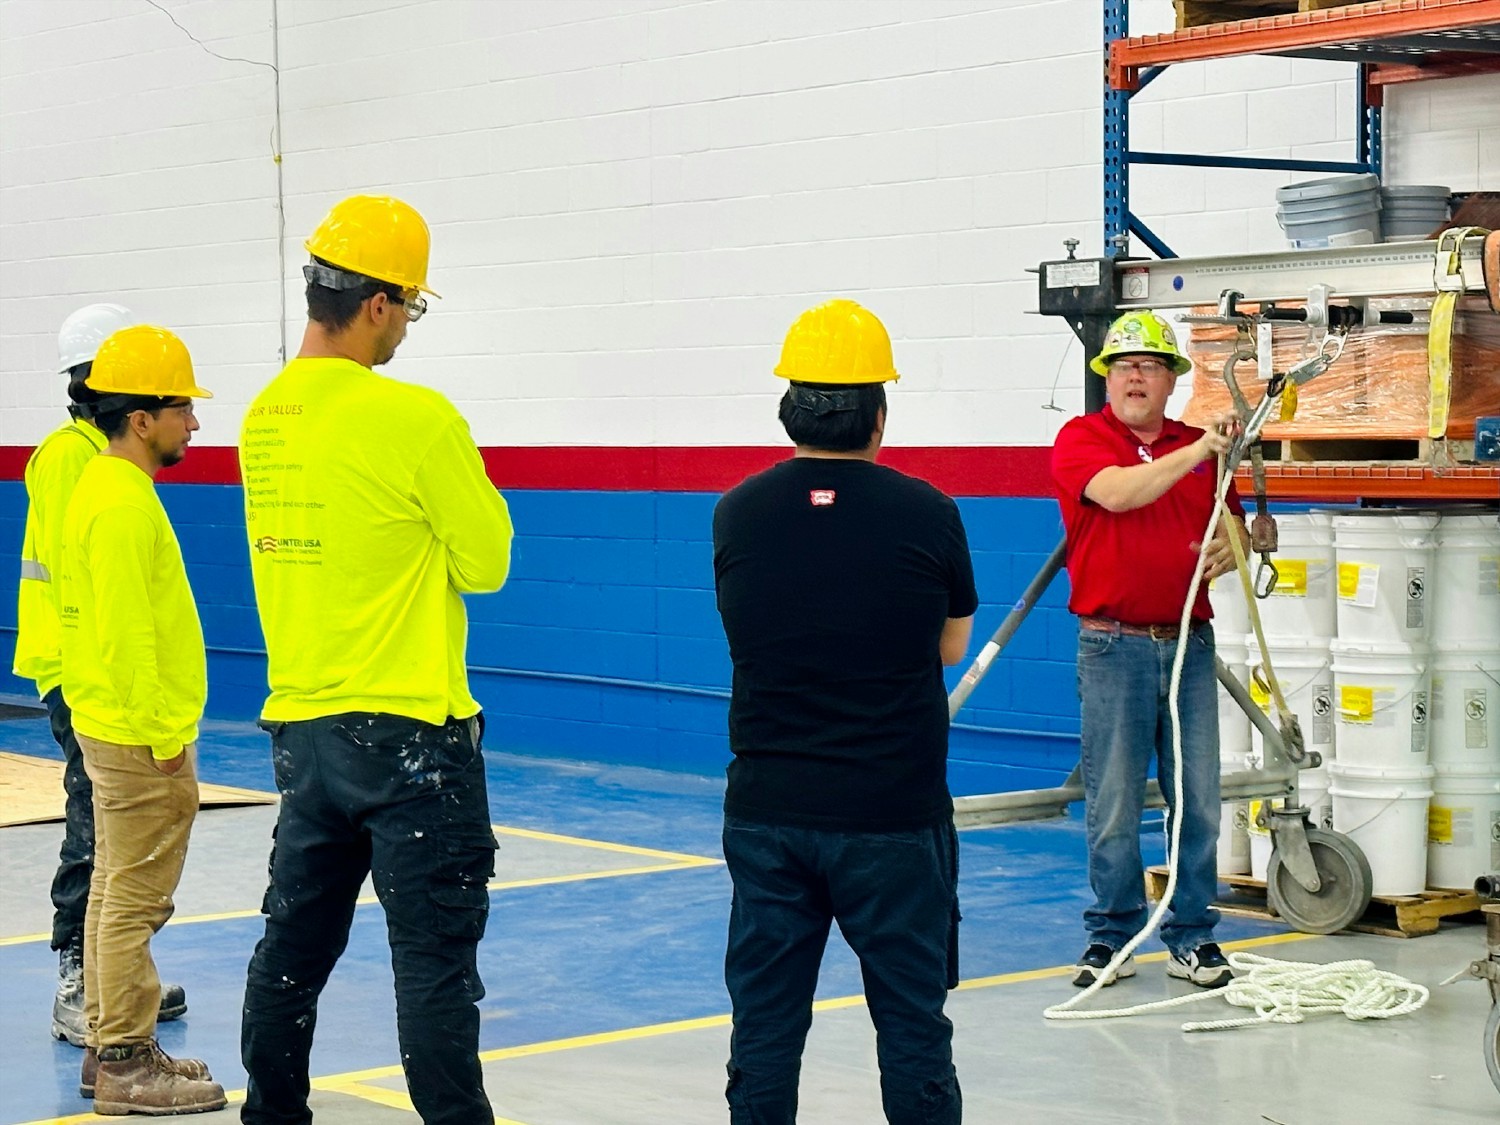 Our Safety Manager hosts our monthly confined space training for new hires. Safety Frist at Painters USA!